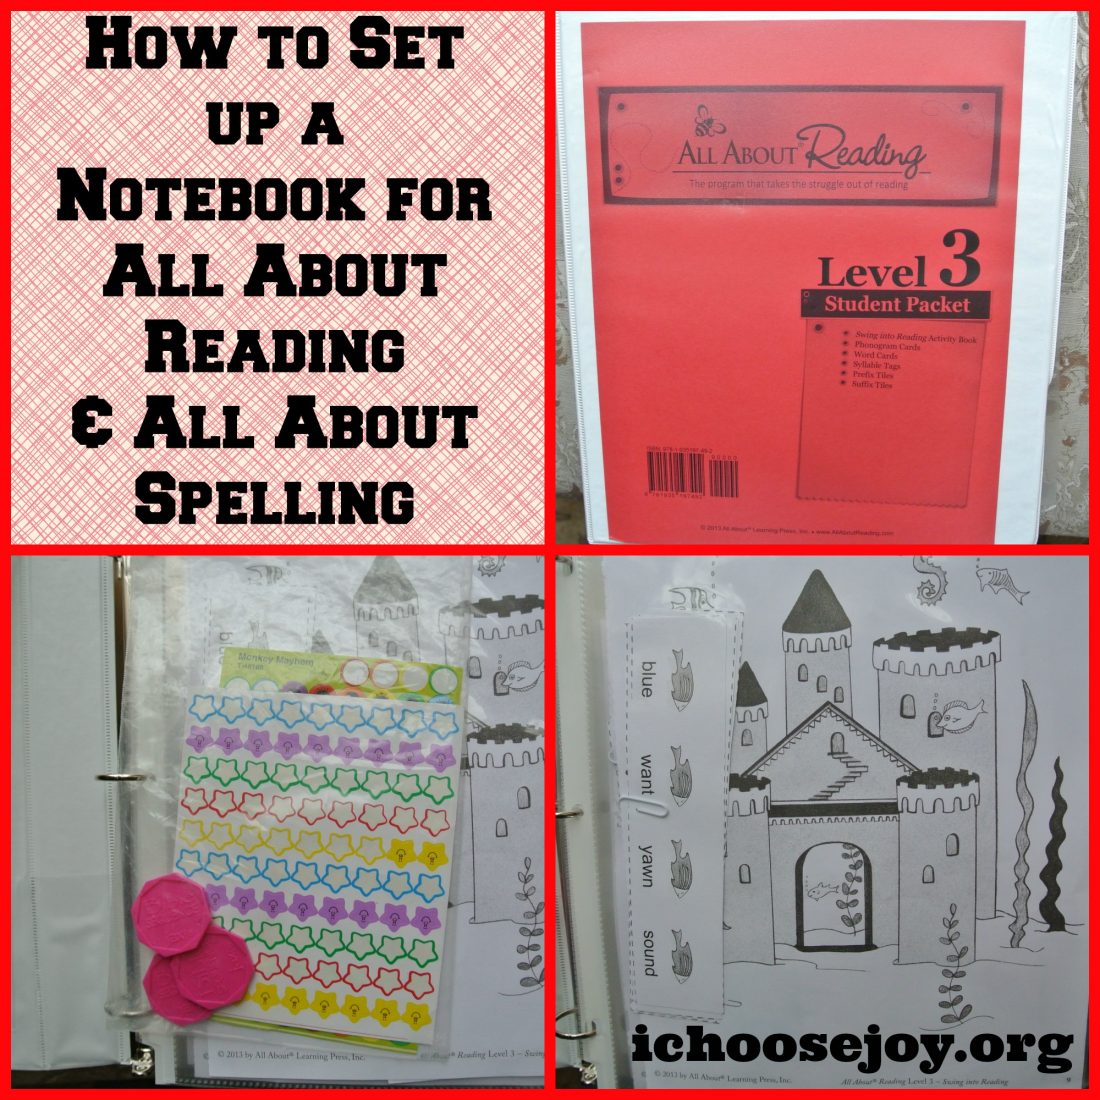 How to Set Up an All About Reading/Spelling Notebook